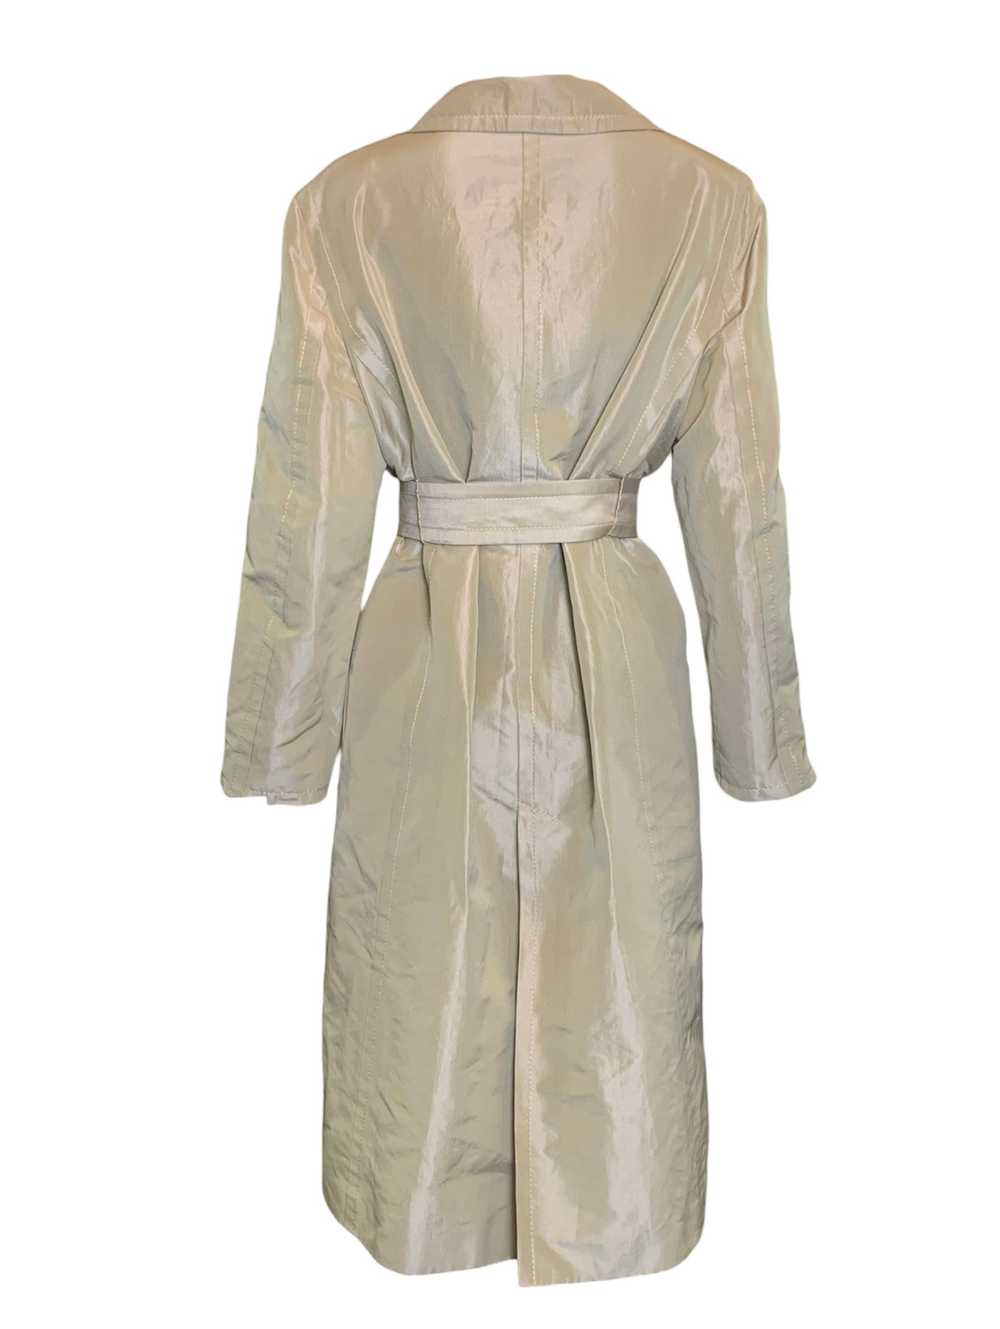 Gianfranco Ferre 1990s Sand Colored Wrap Trench C… - image 3